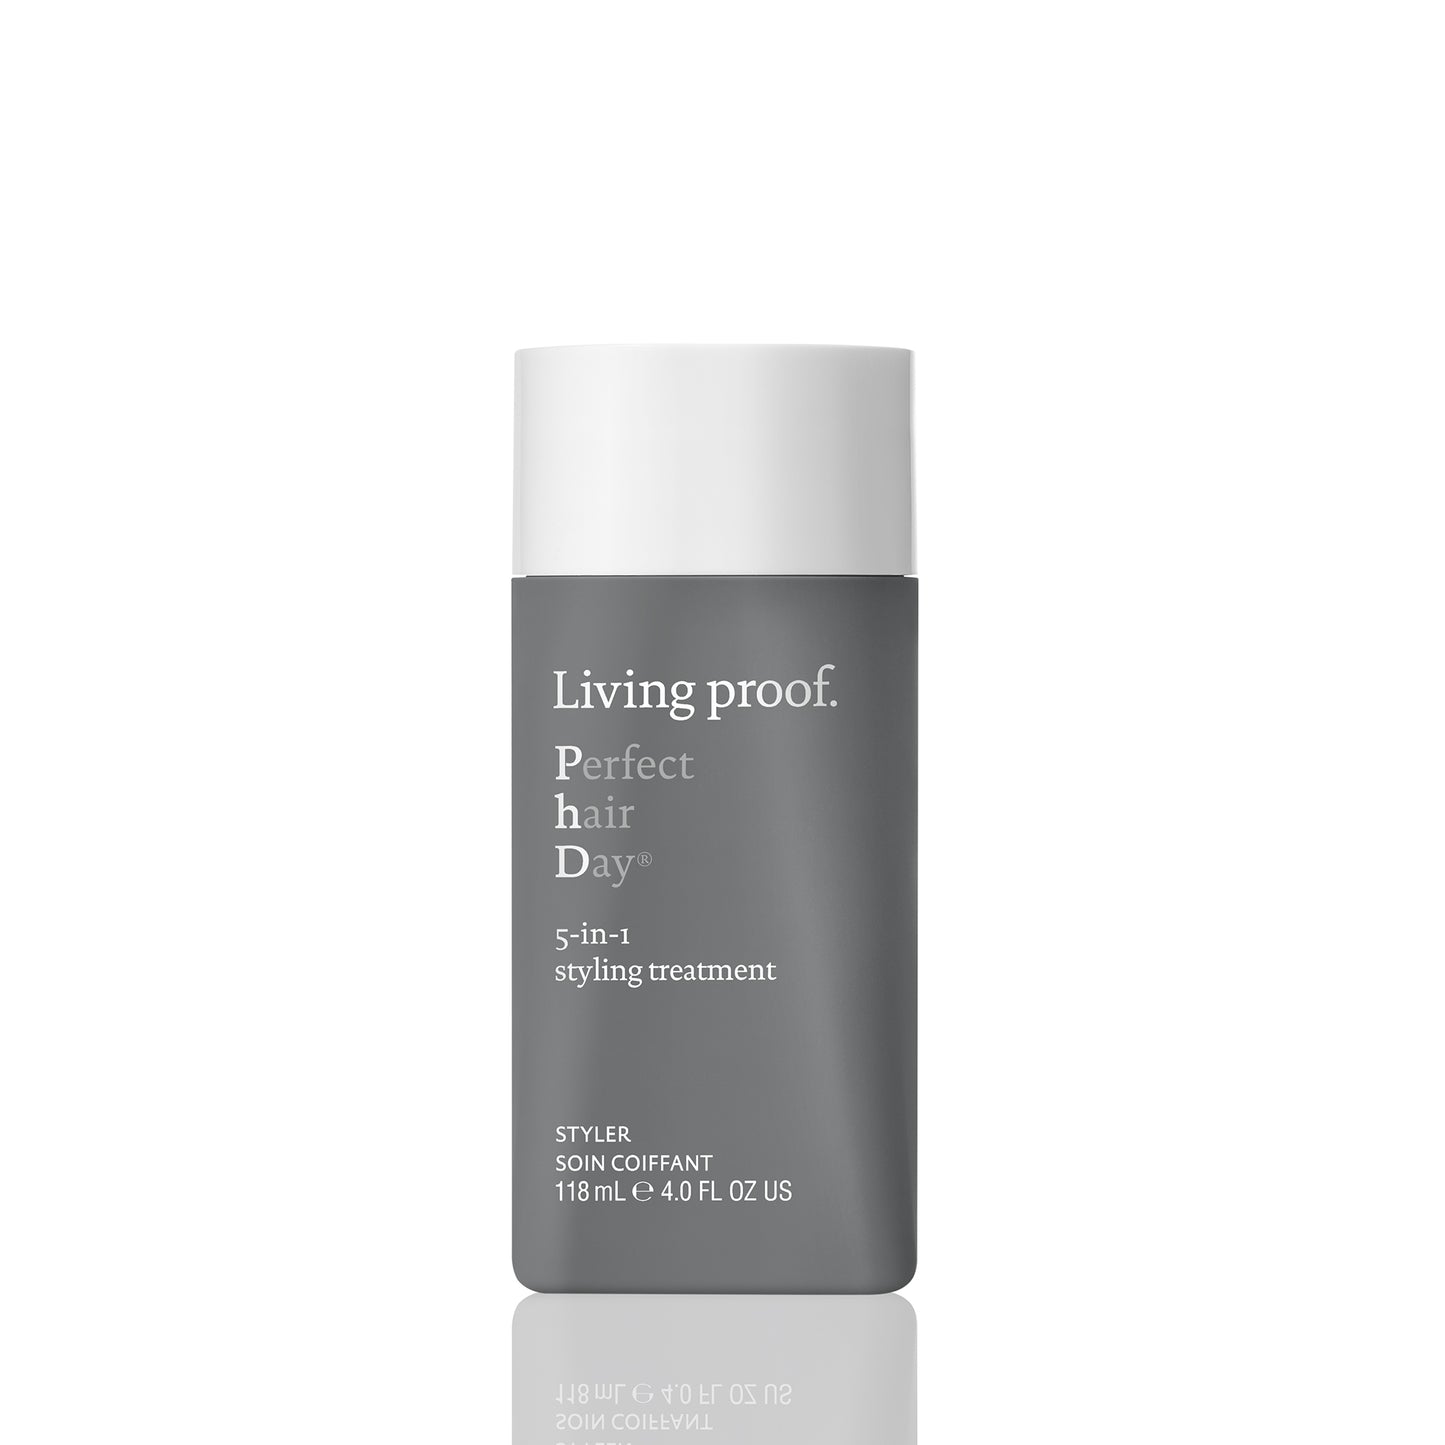 Living Proof Perfect Hair Day 5 in 1 Styling Treatment, 4 oz.